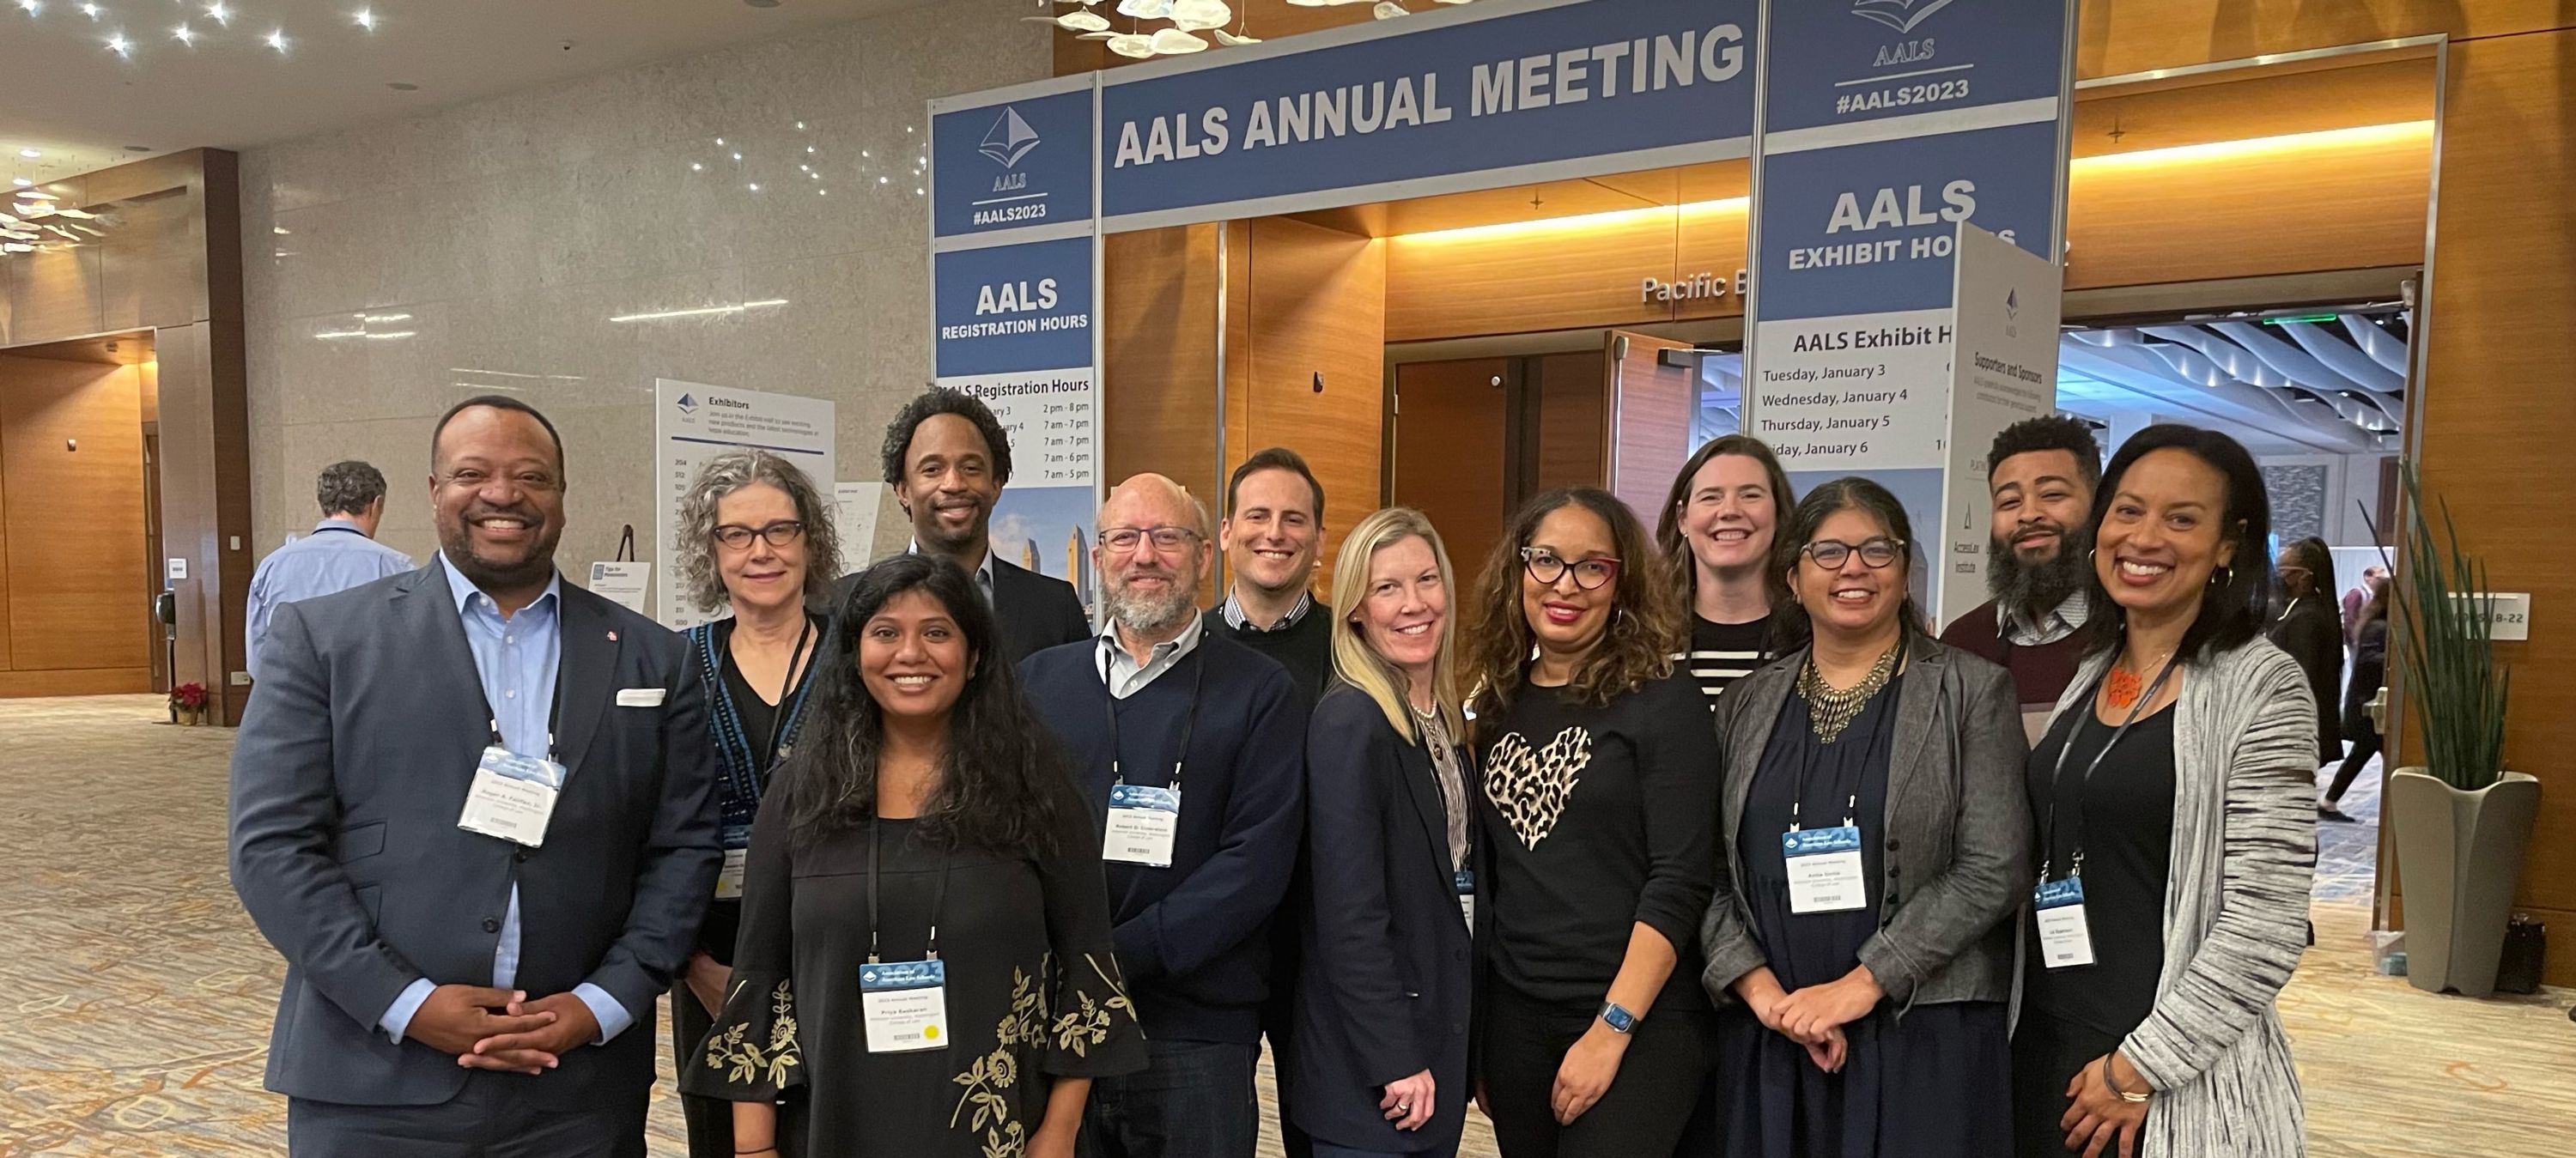 WCL faculty presence contributes to strong return to in-person AALS annual meeting 